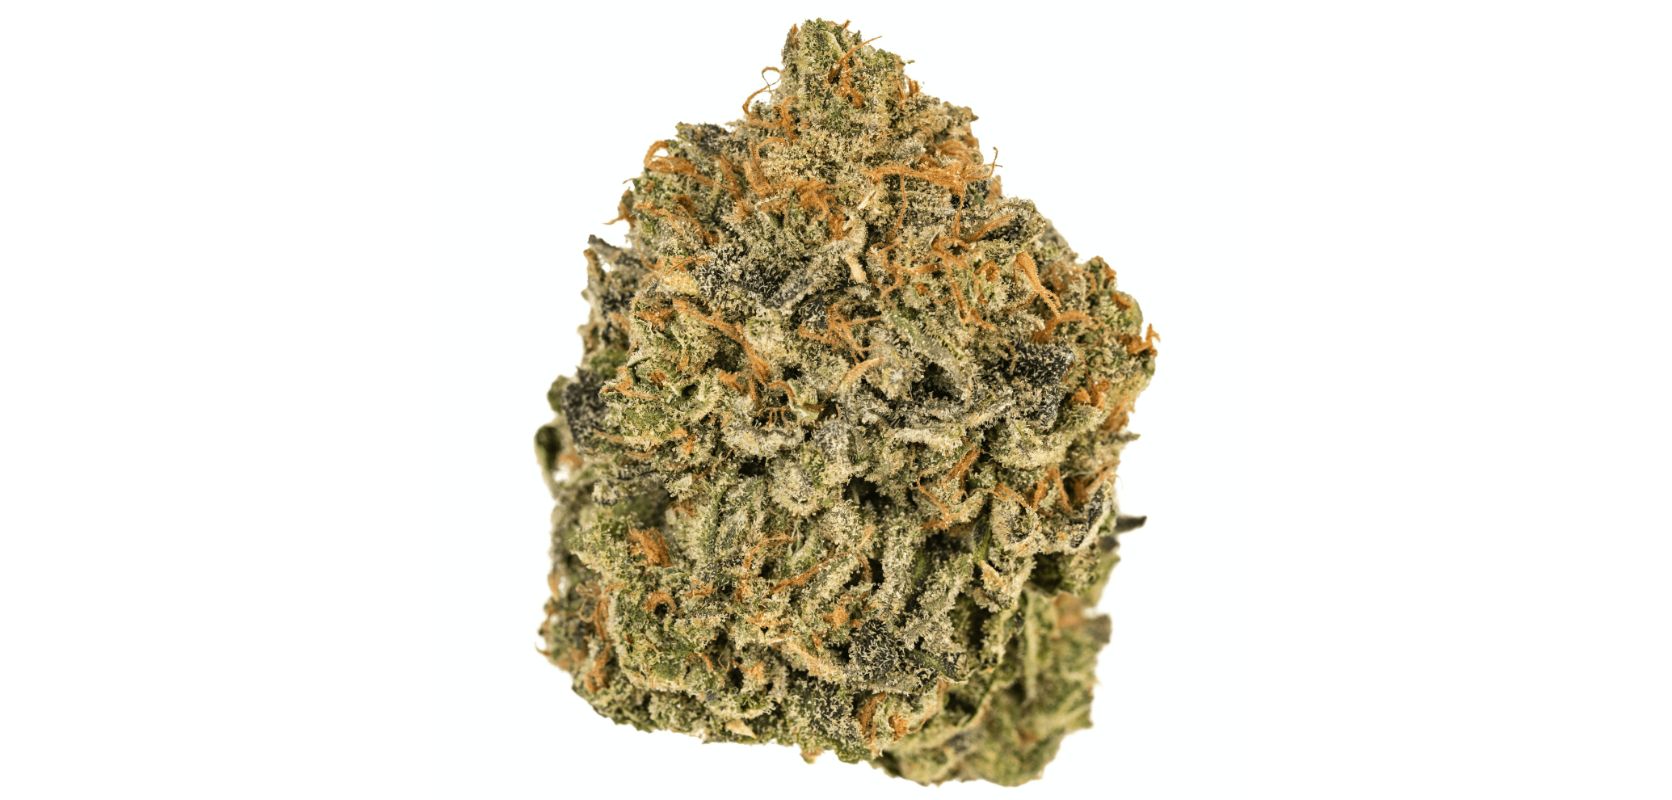 The Wedding Cake strain is beloved for its high THC levels and complex terpene profile, which makes it a popular choice among medical cannabis users looking to treat a variety of severe conditions. 